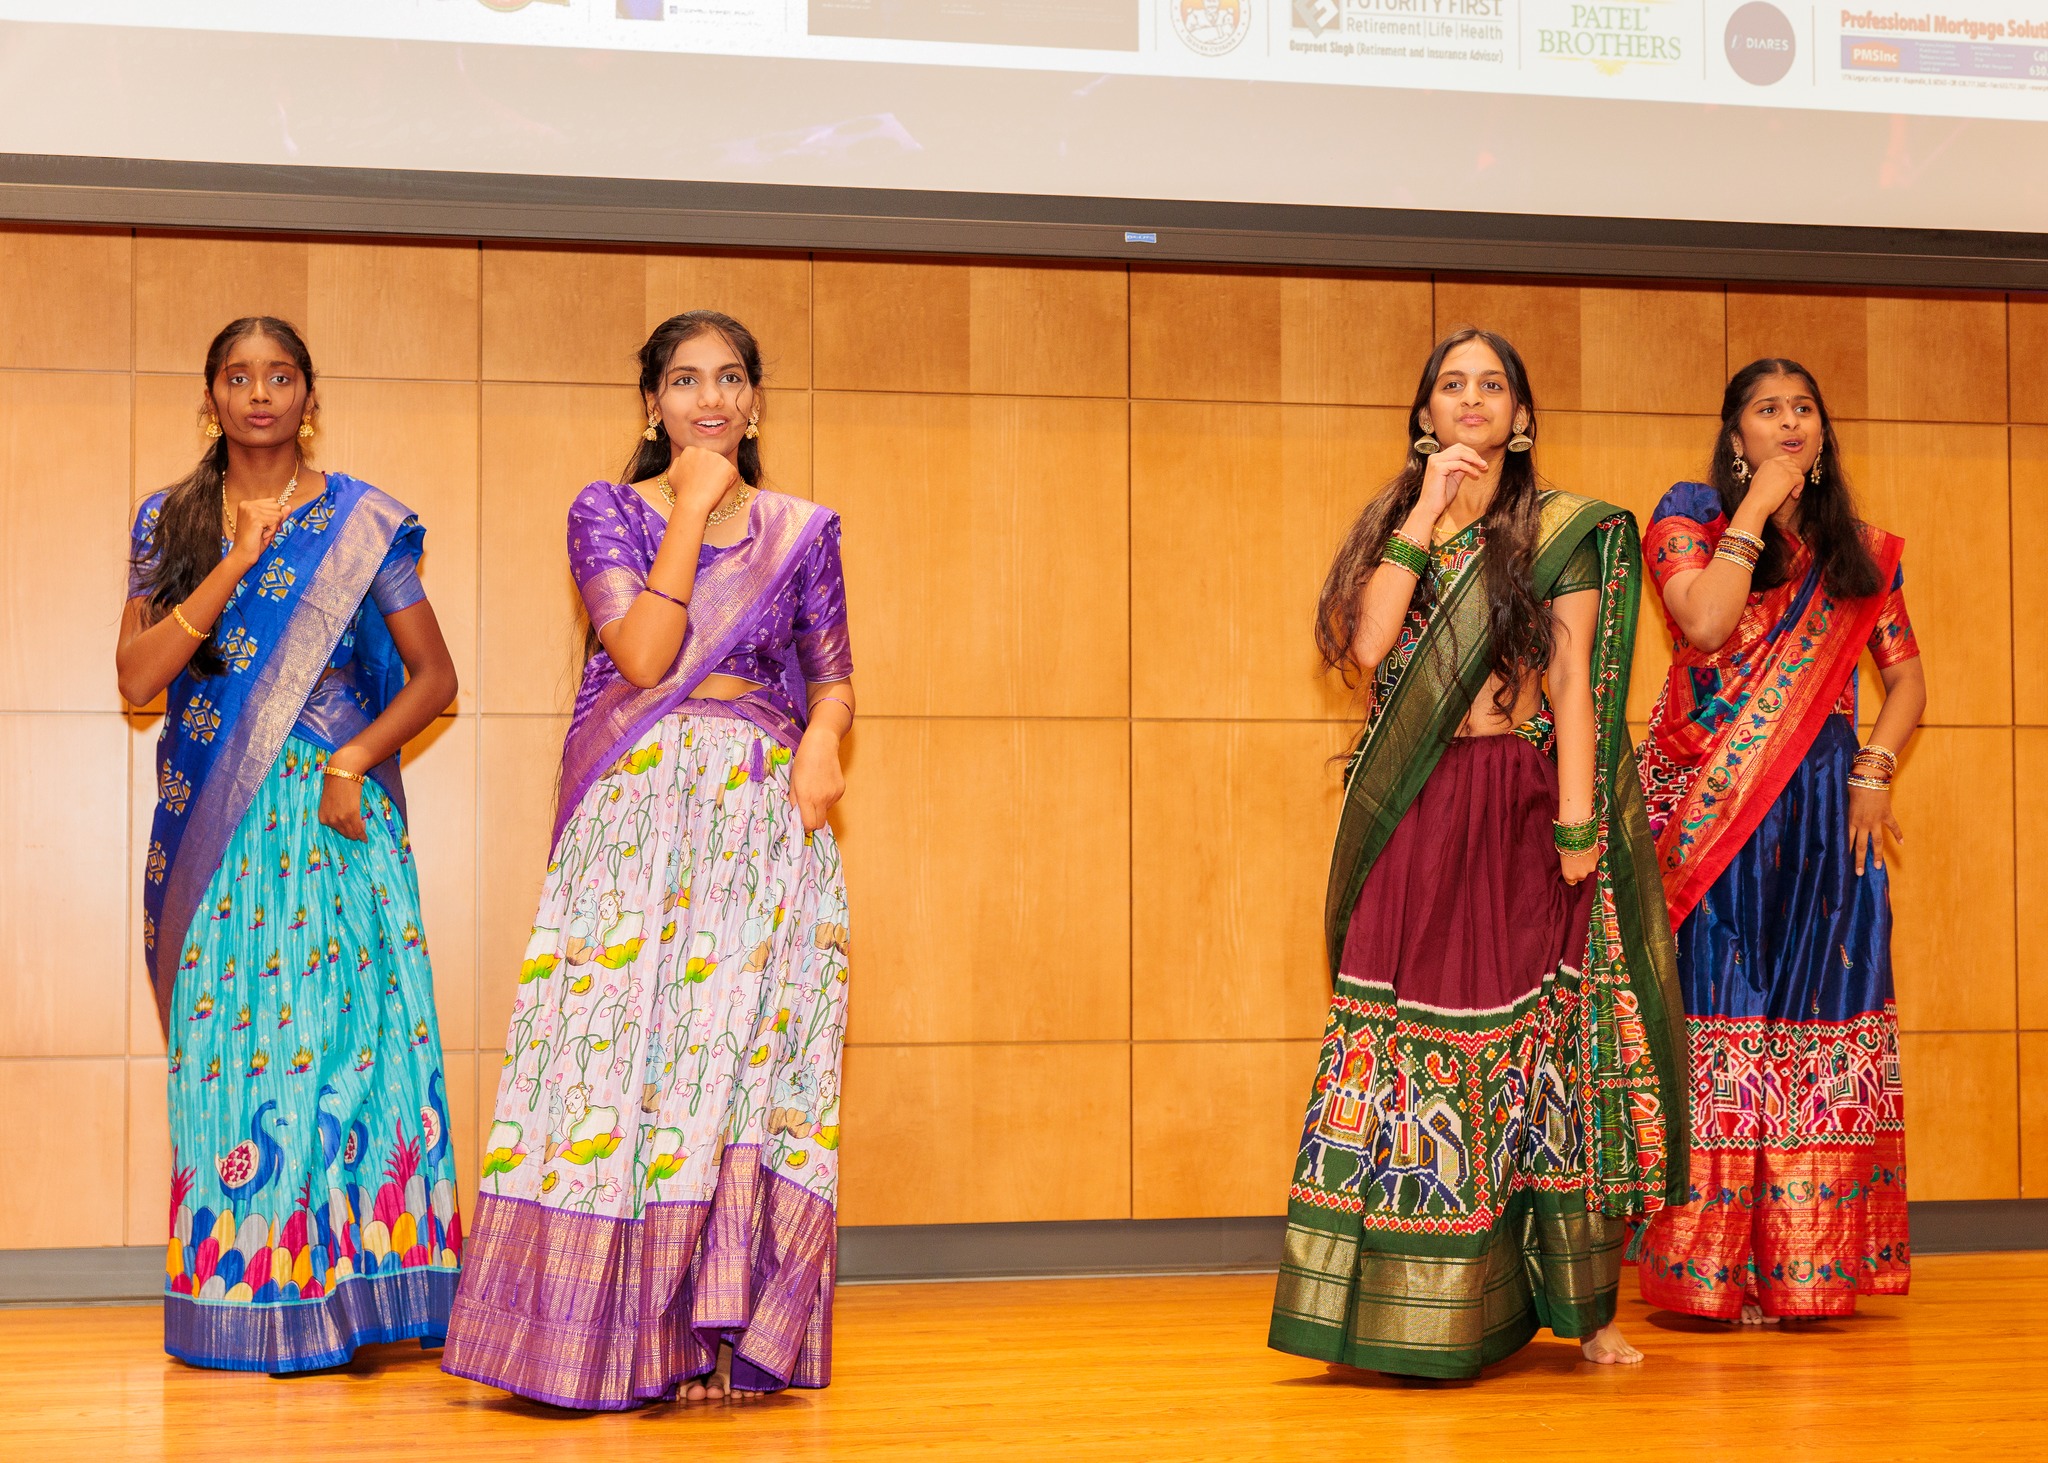 Tana Cultural Competitions started grandly in America (11)